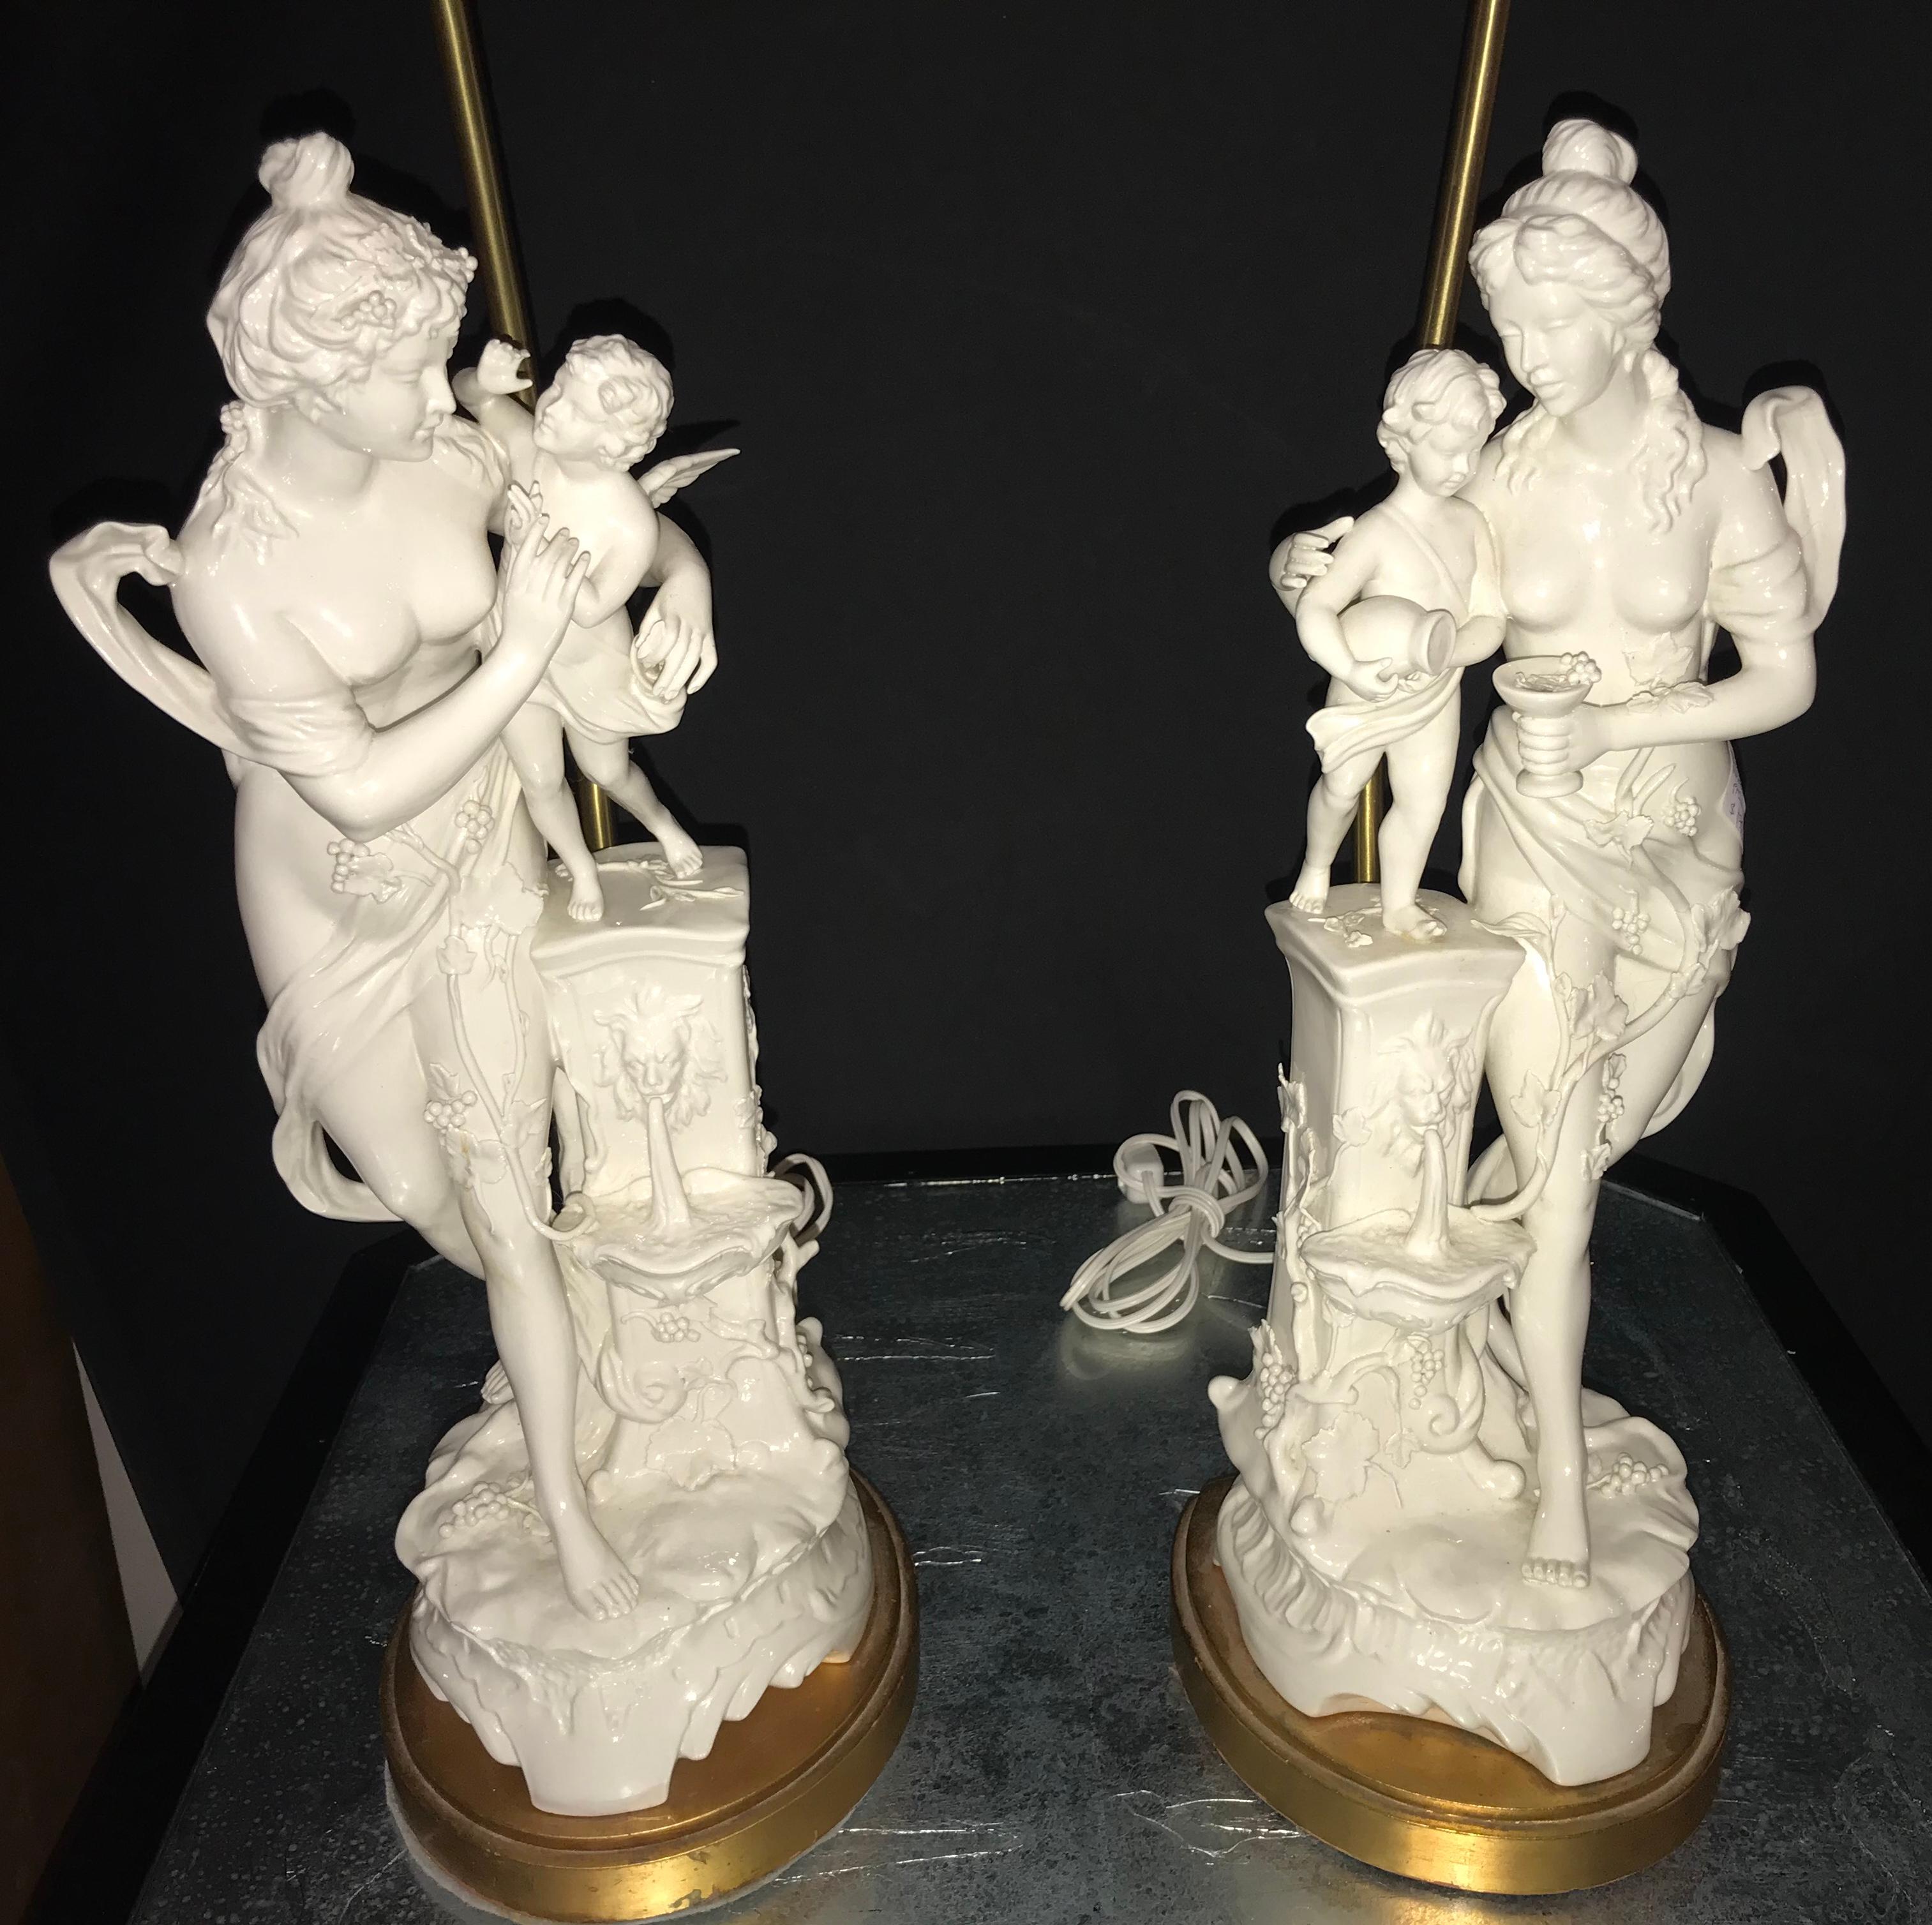 Pair of Large Porcelain Figural Opposing Bare Brested Woman & Angel Table Lamps (Neoklassisch)